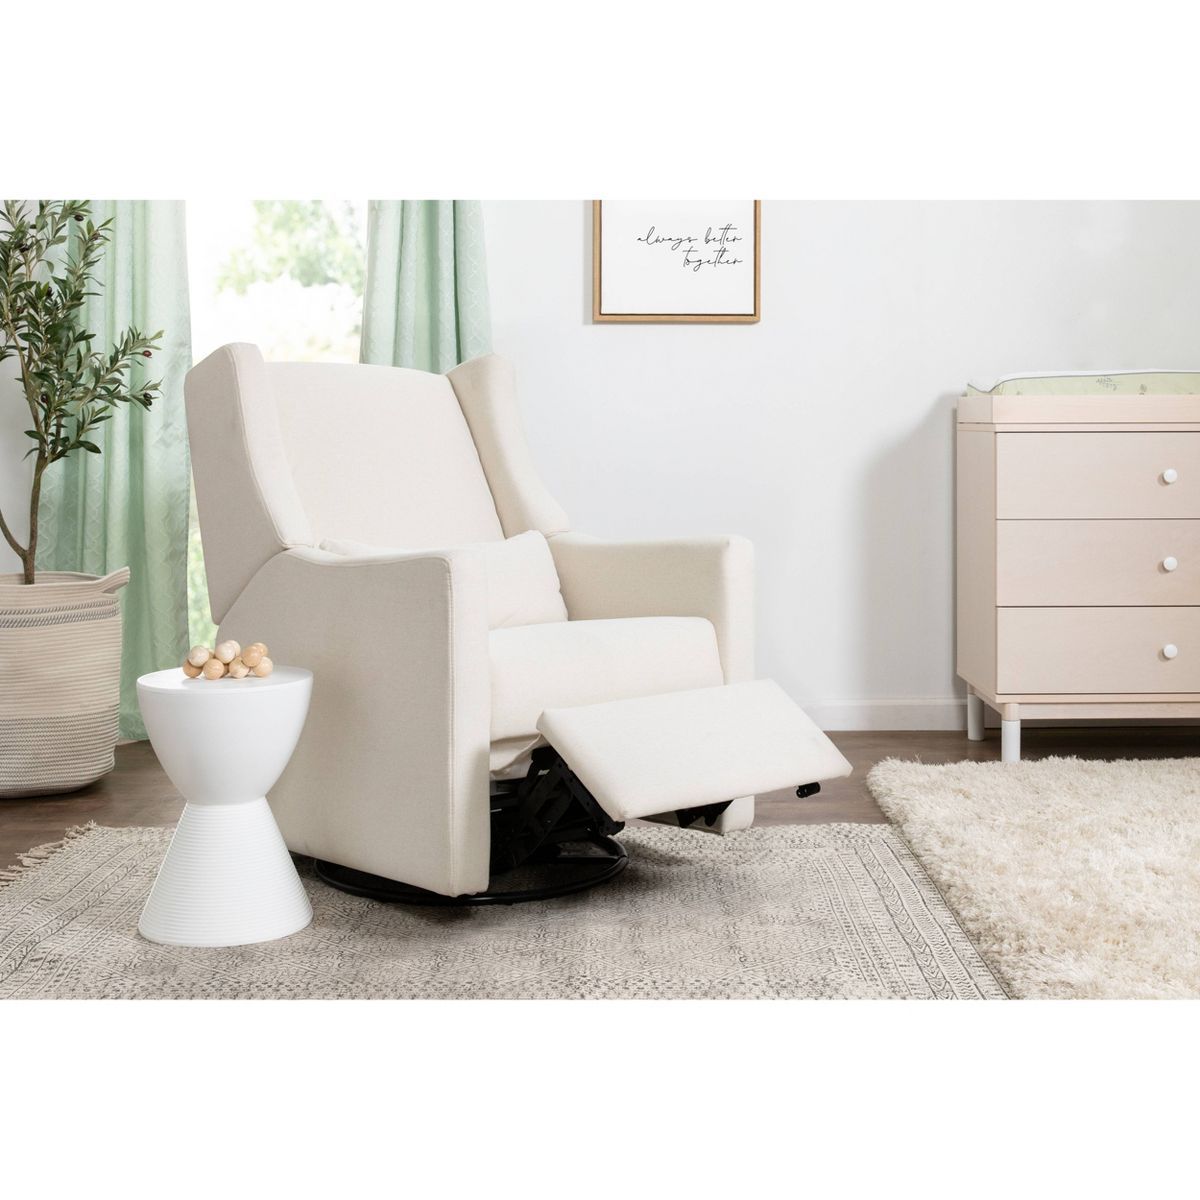 Babyletto Kiwi Glider Recliner with Electronic Control and USB | Target